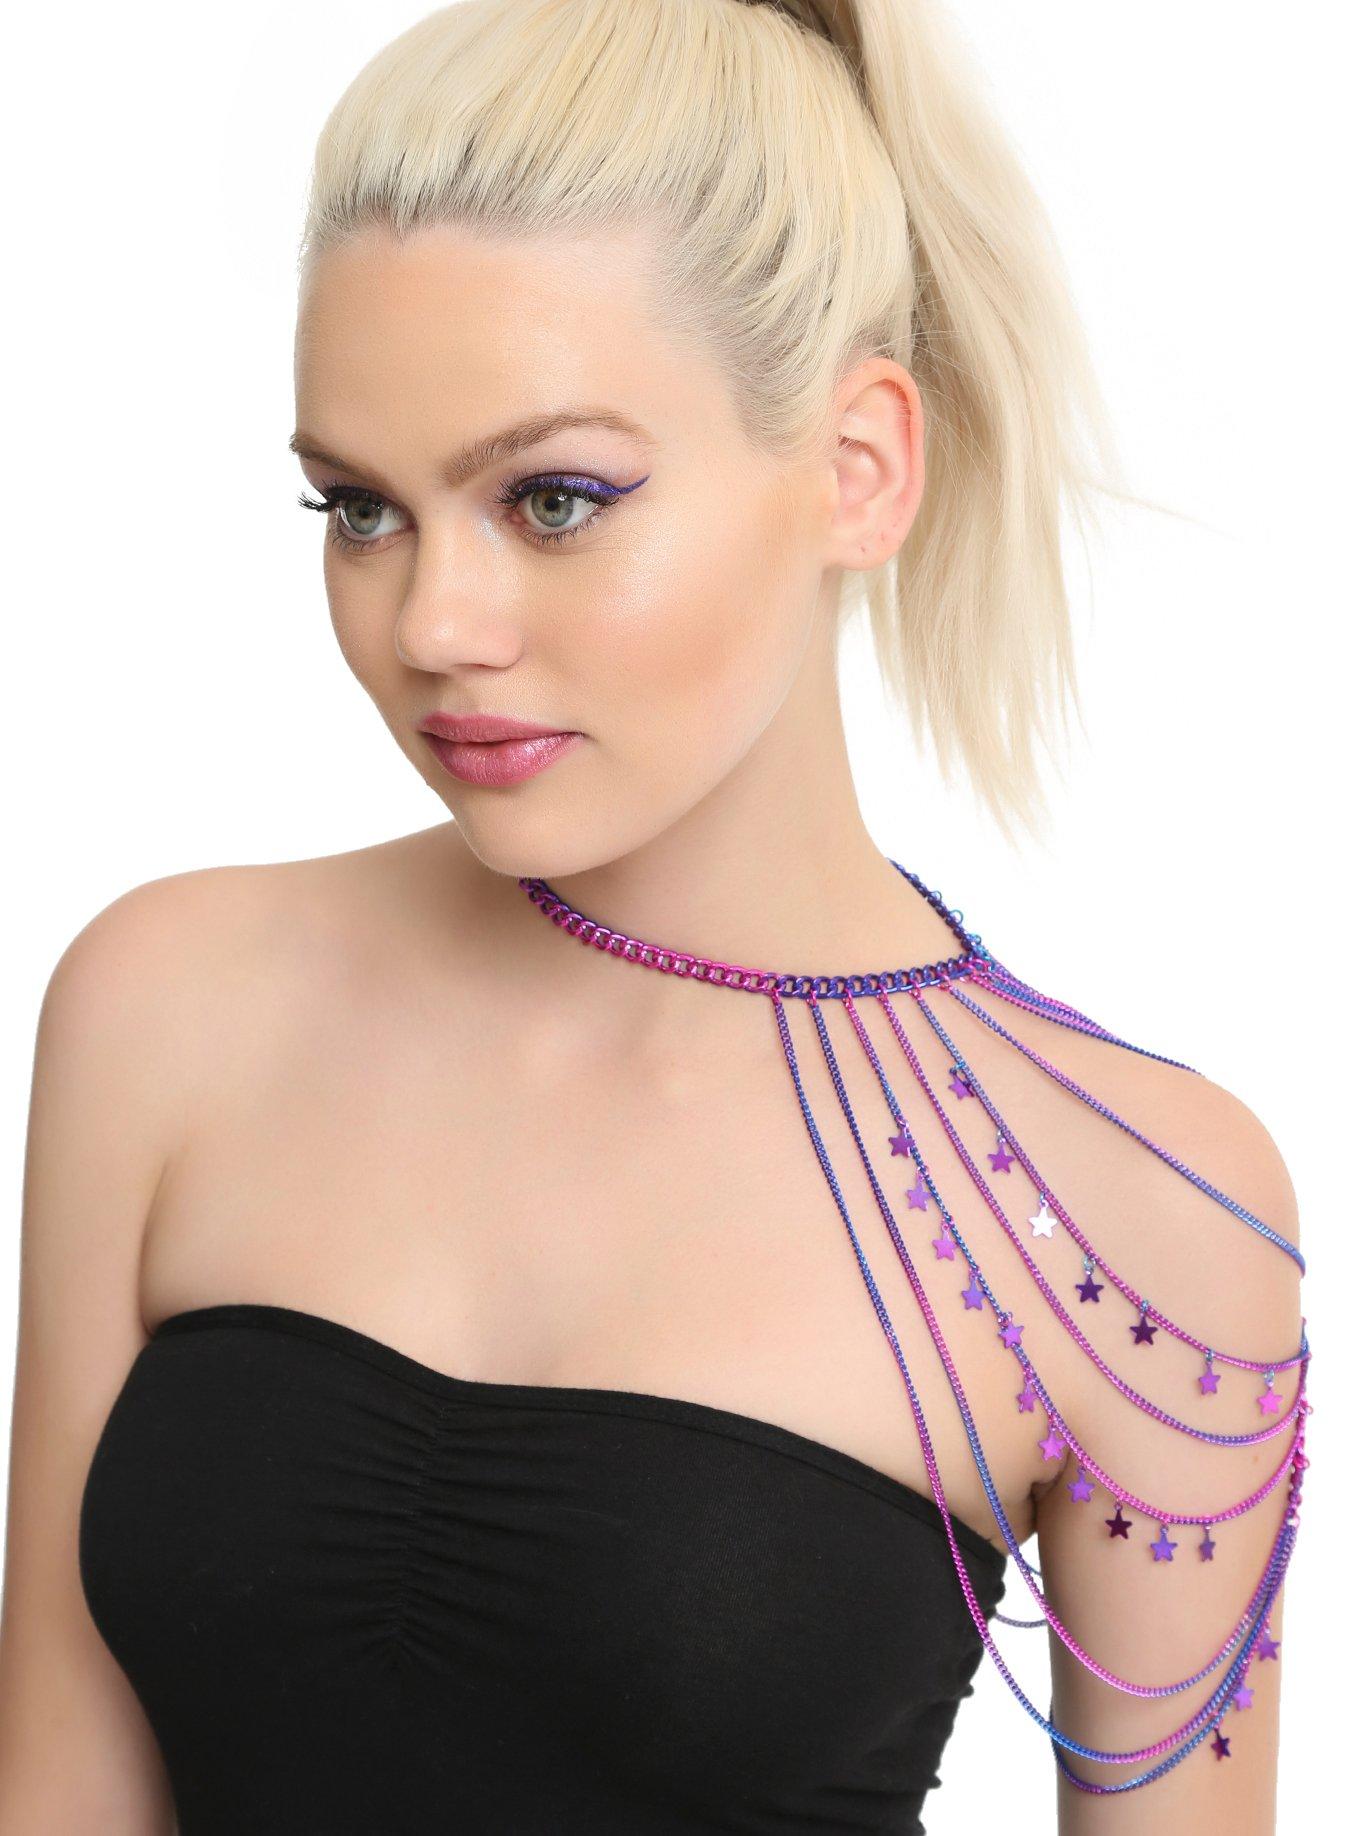 Blackheart Anodized One Shoulder Body Chain, , hi-res